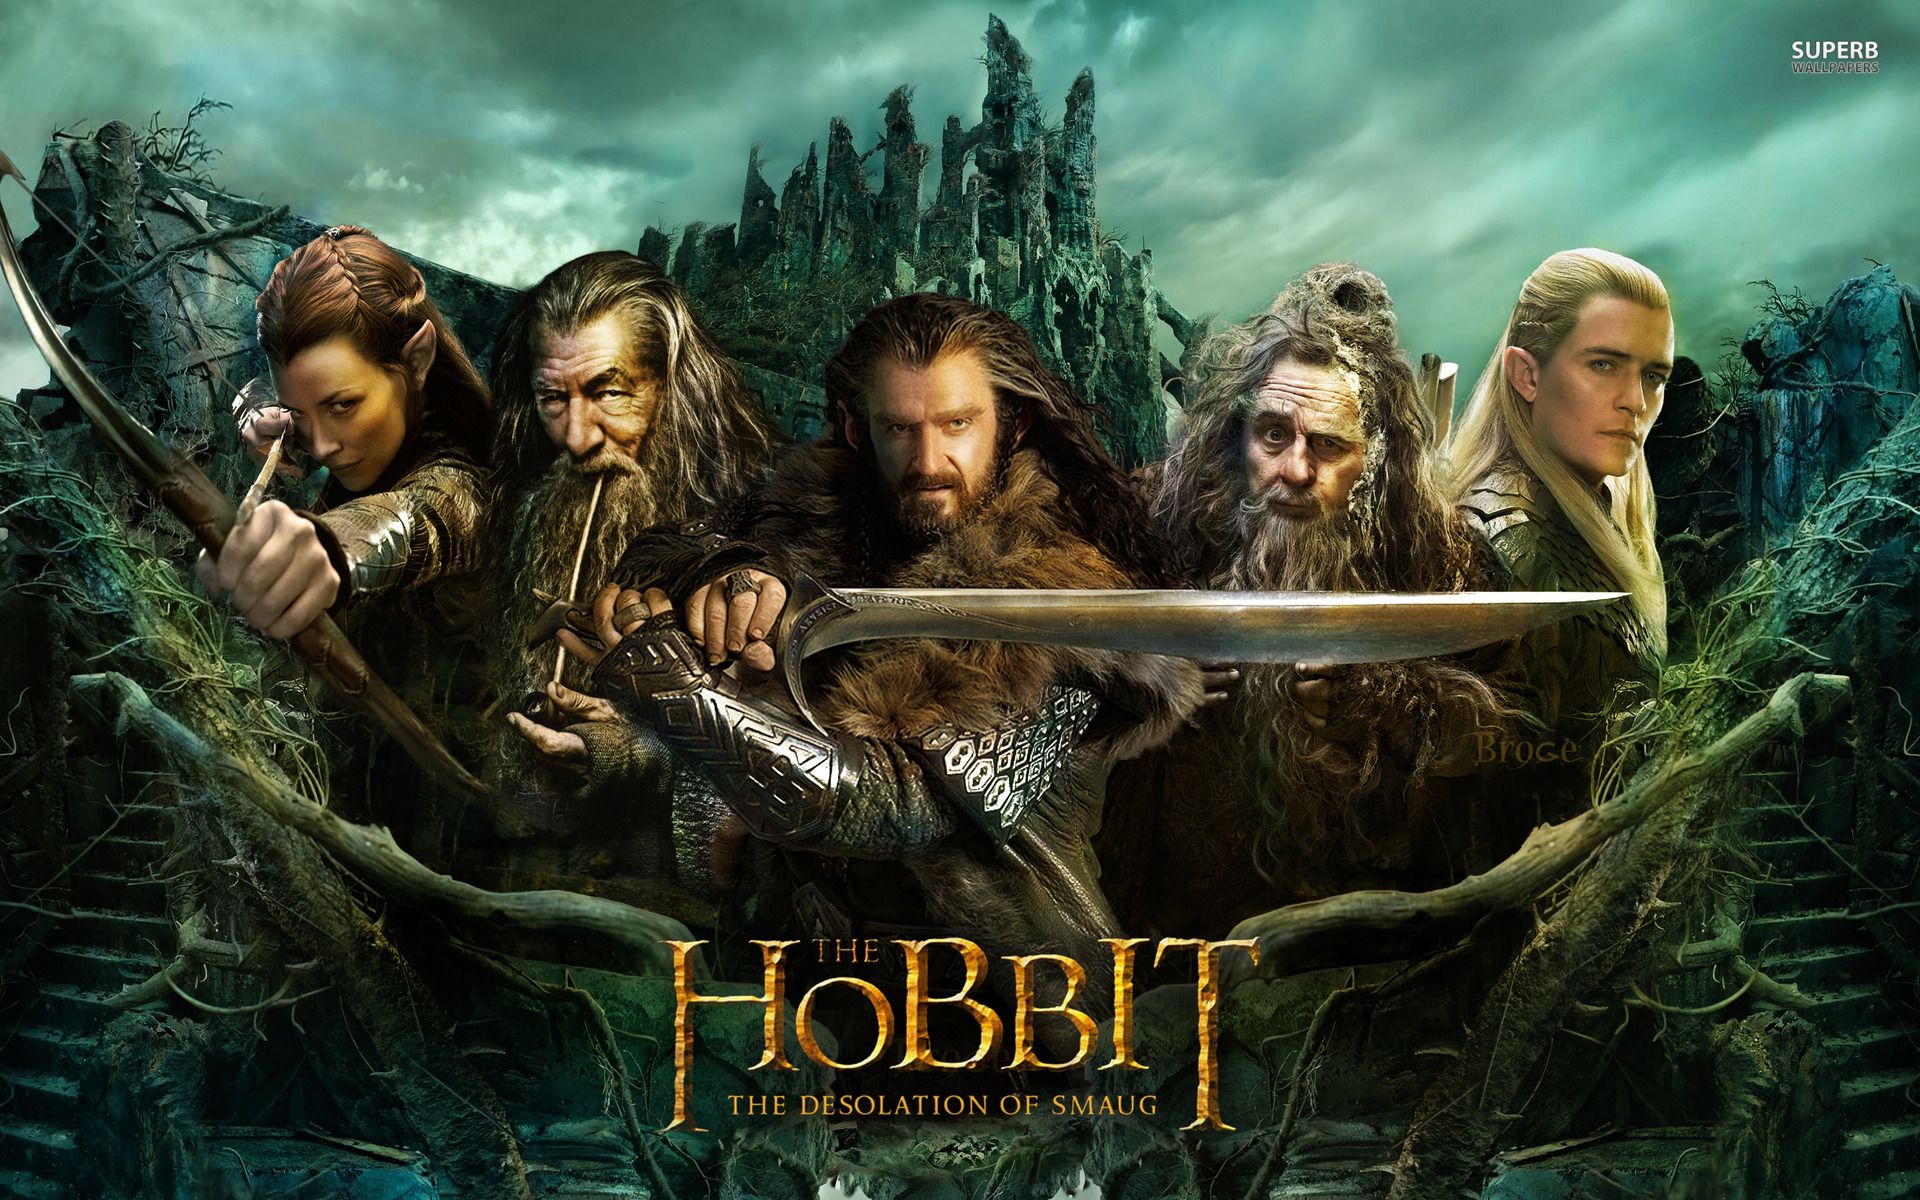 The Hobbit The Desolation of Smaug wallpaper - Movies Full HD